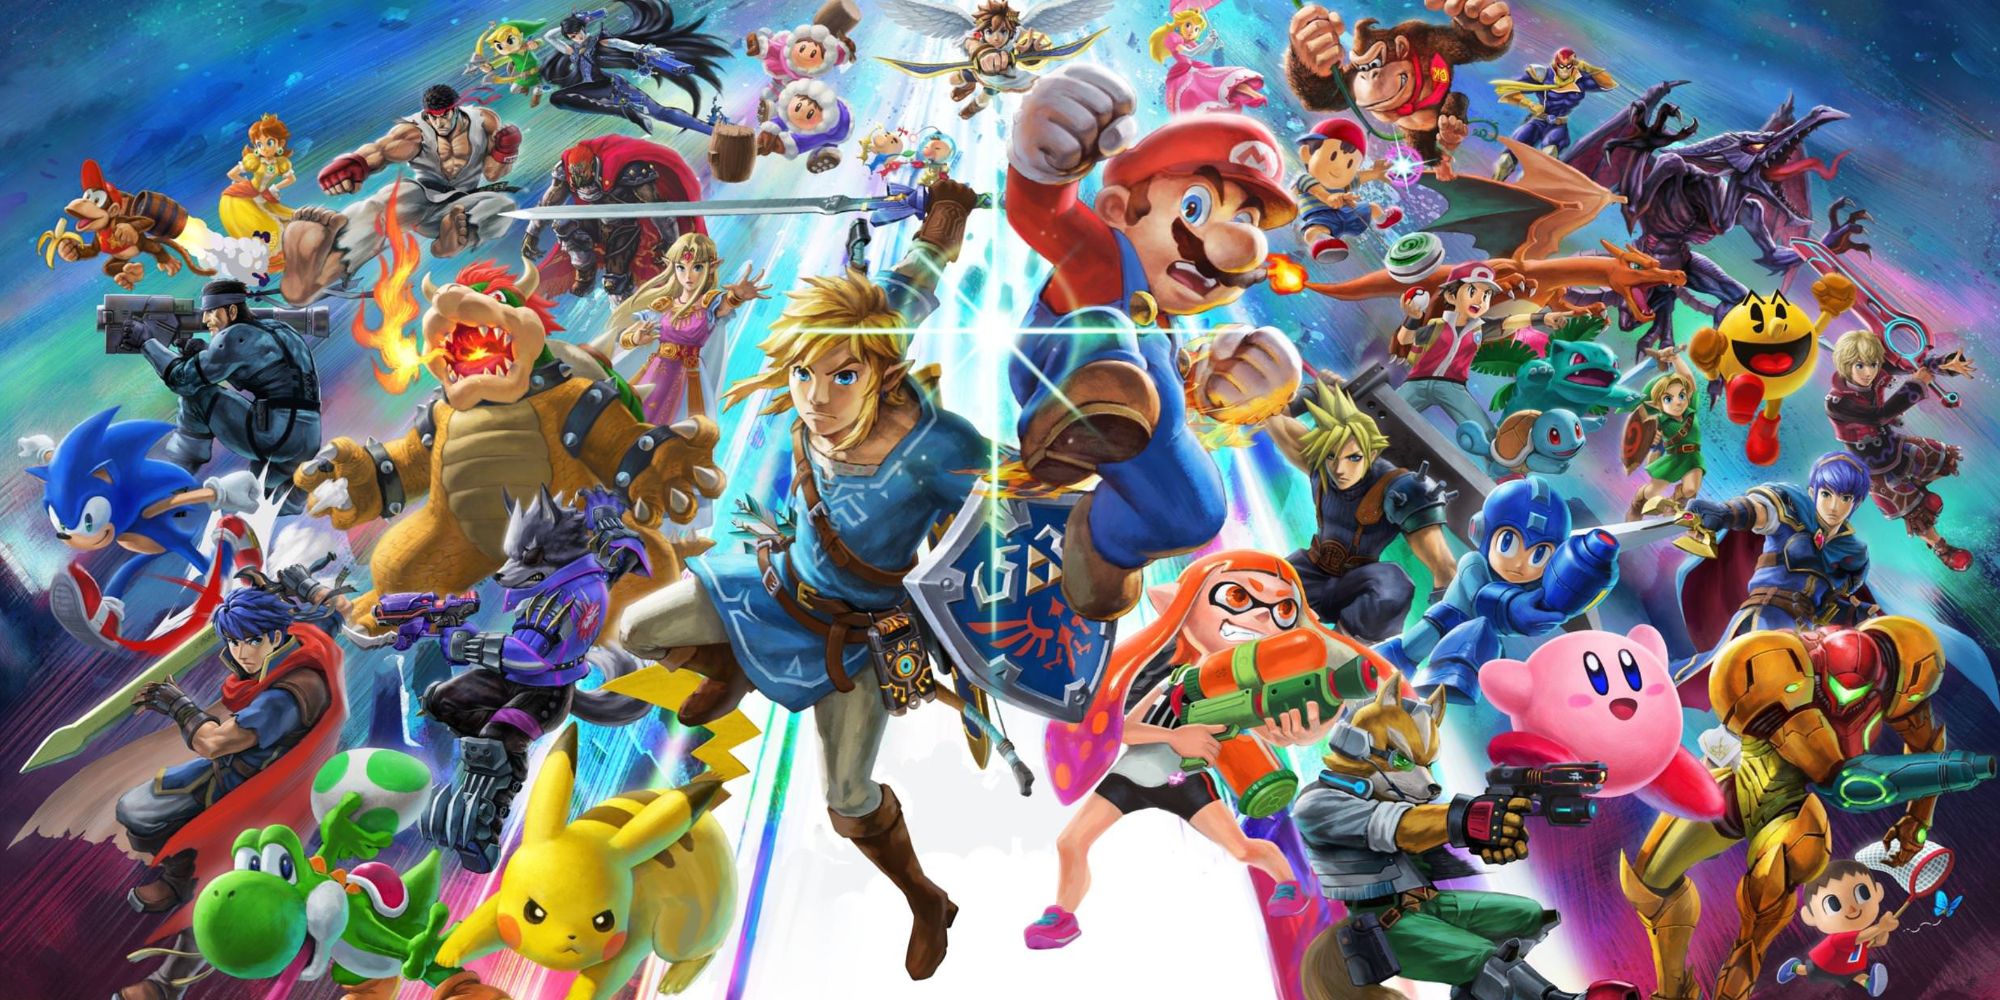 Super Smash Bros Ultimate - Mario, Link, Pikachu, Inkling, And Many Other Fighters